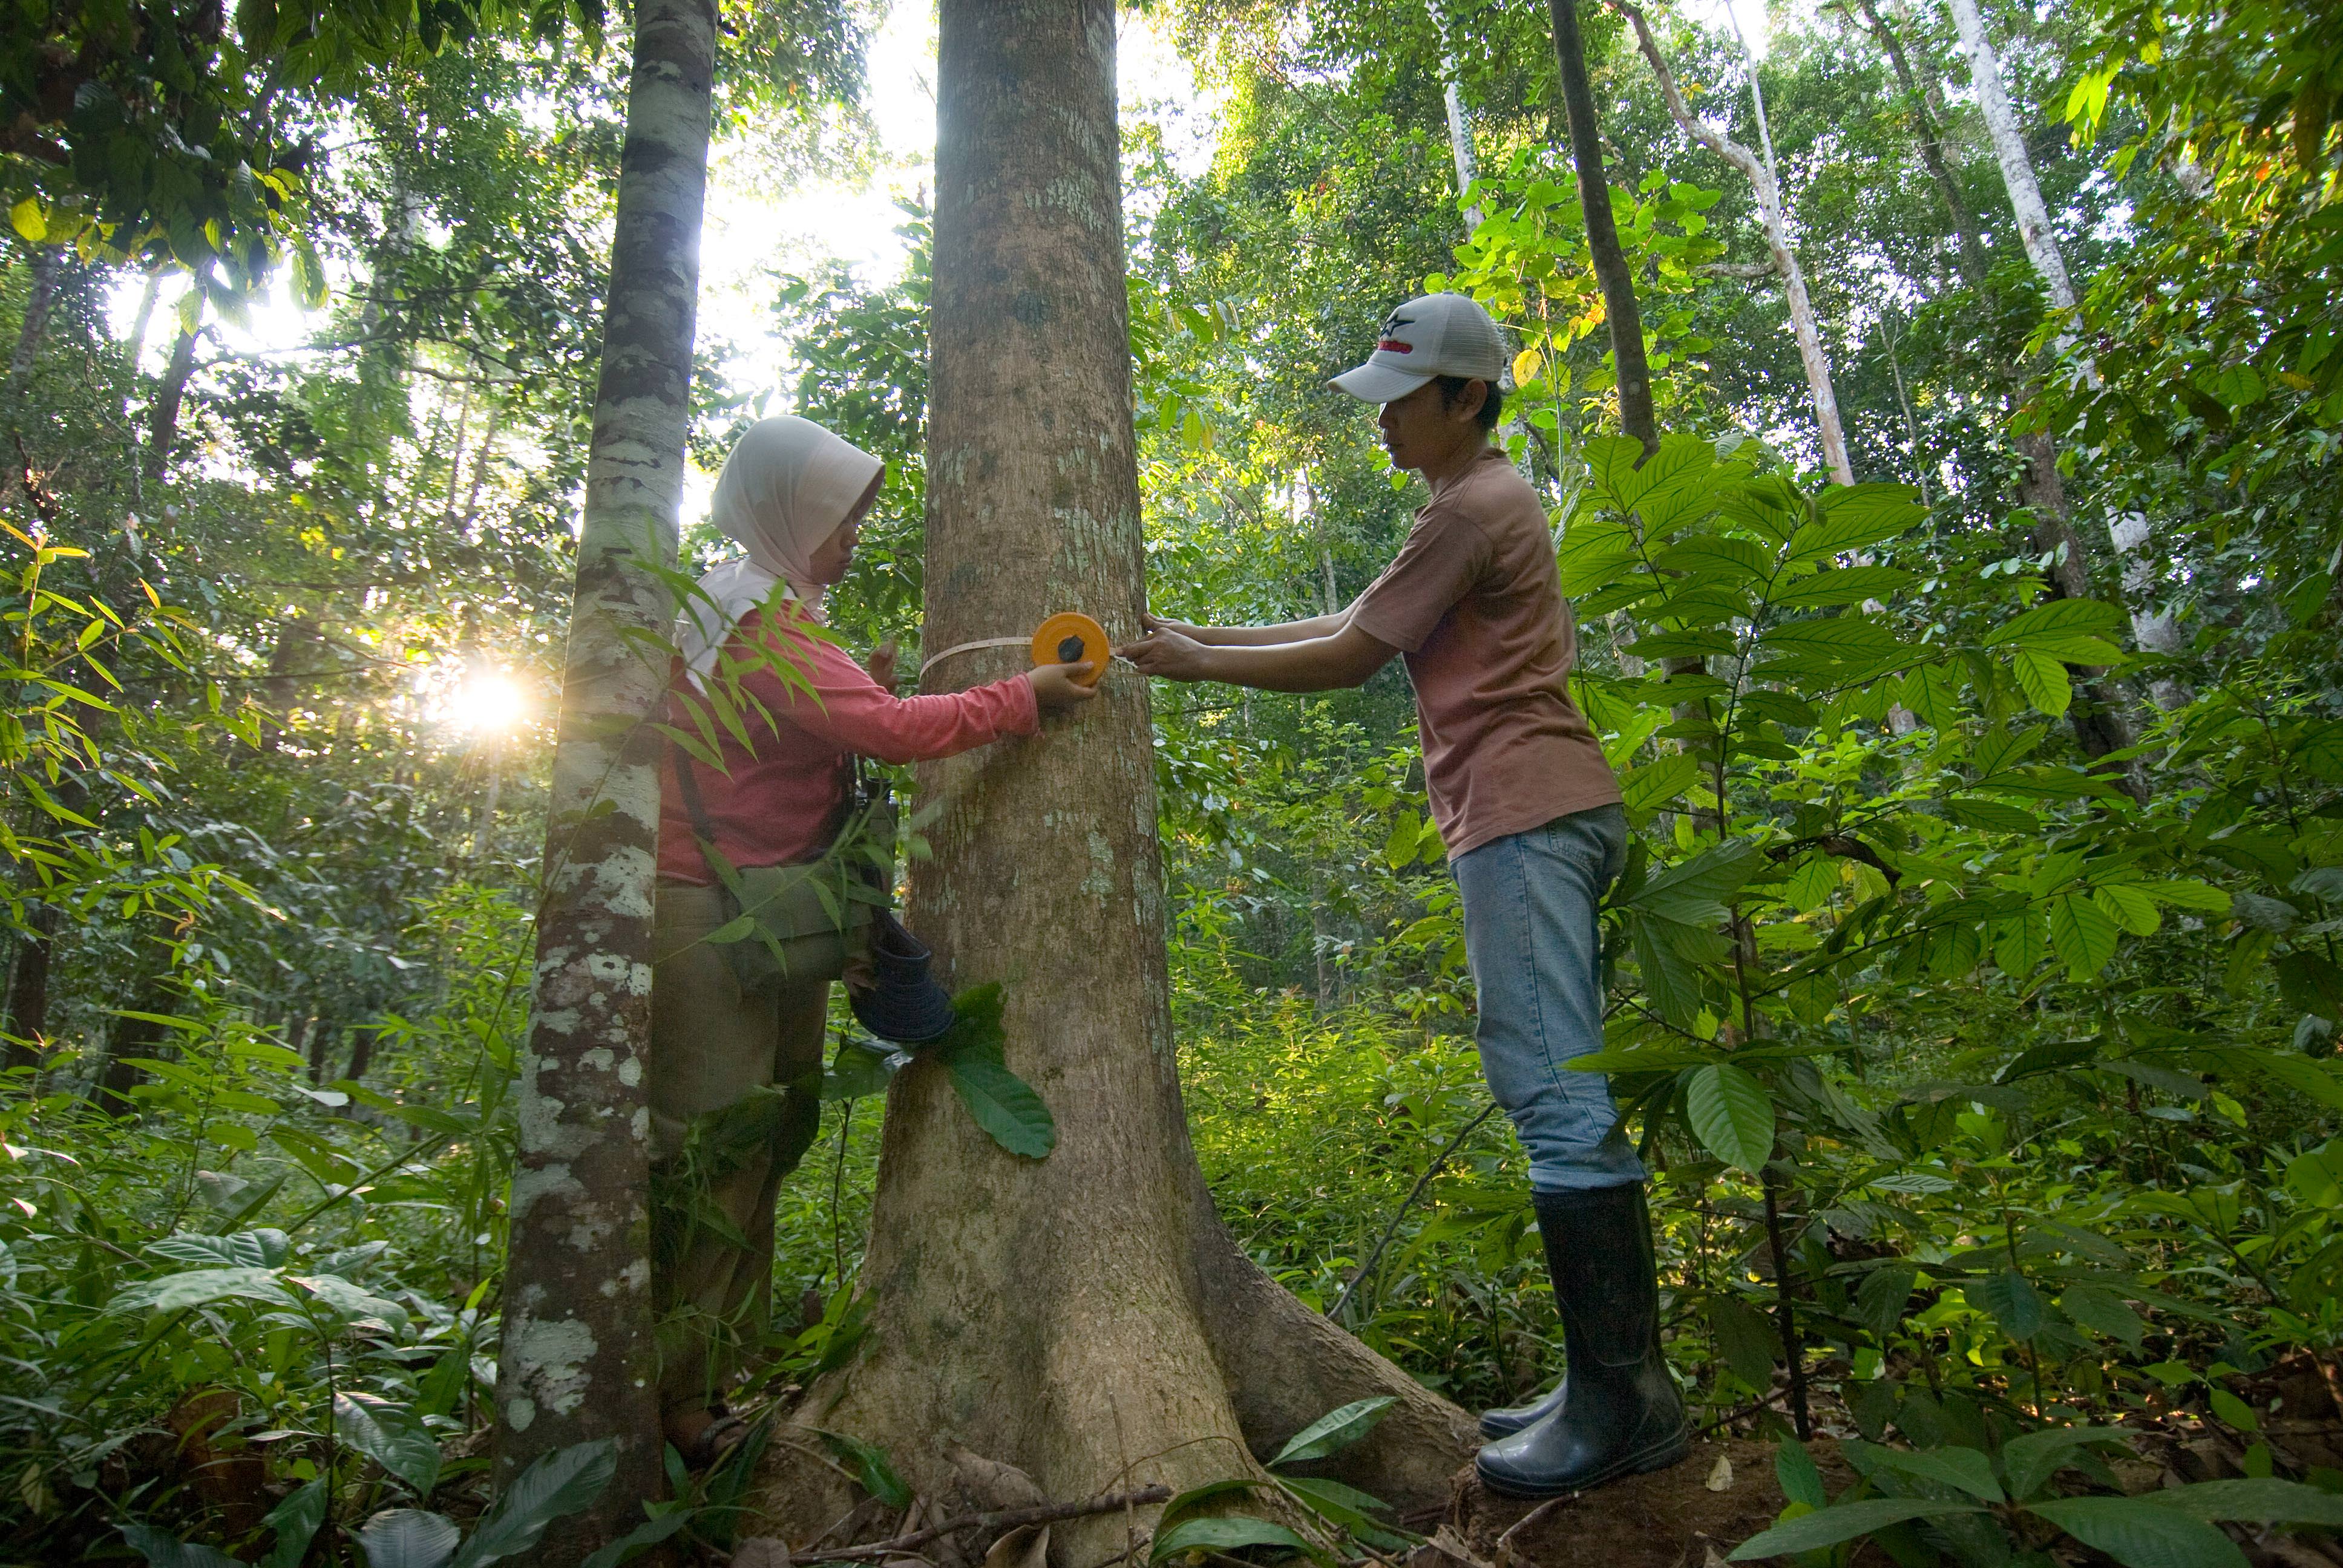 Two workers measuring the circumference of a tree.